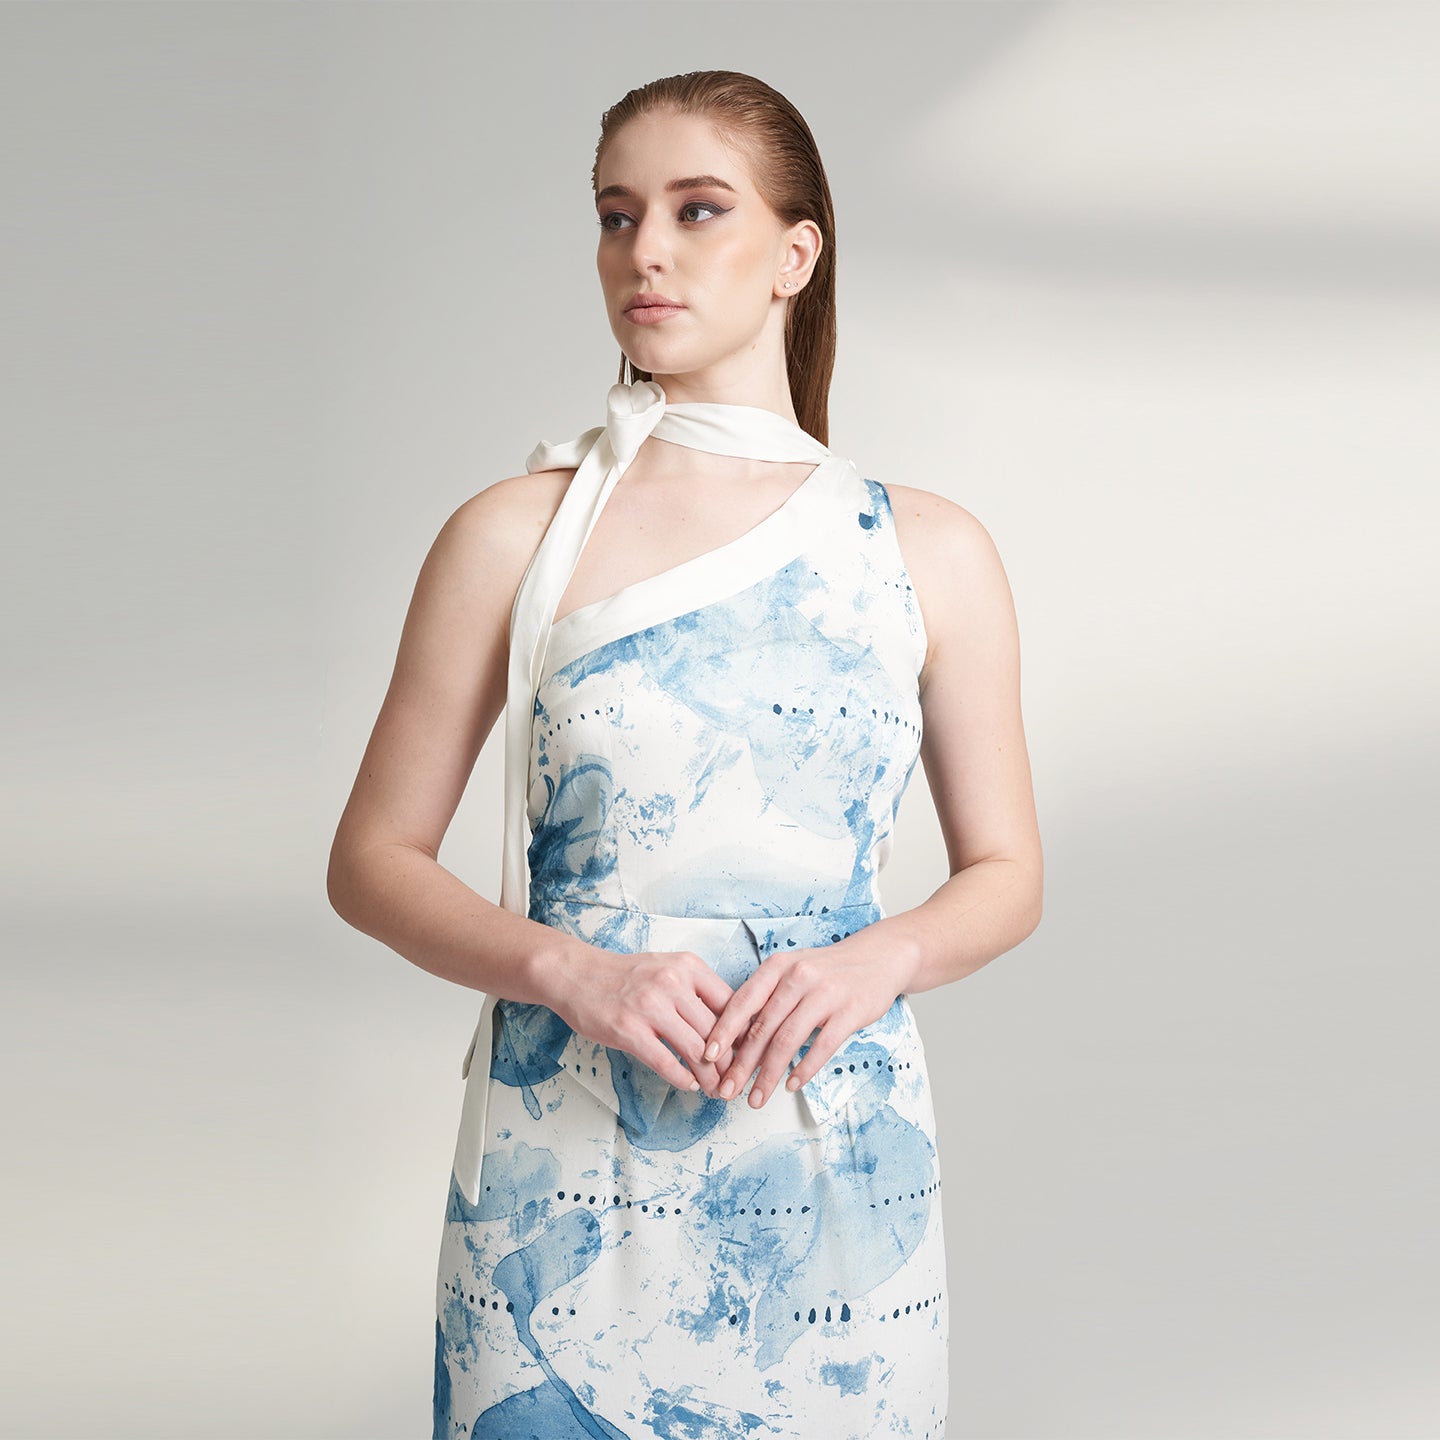 An elegant off-white blue organic lotus fabric dress. Showcasing asymmetrical skirt panels and a slender scarf-like extension that gracefully extends from the bodice to the shoulders. Printed in Blue and off-white print inspired from our antique reminisces collection.